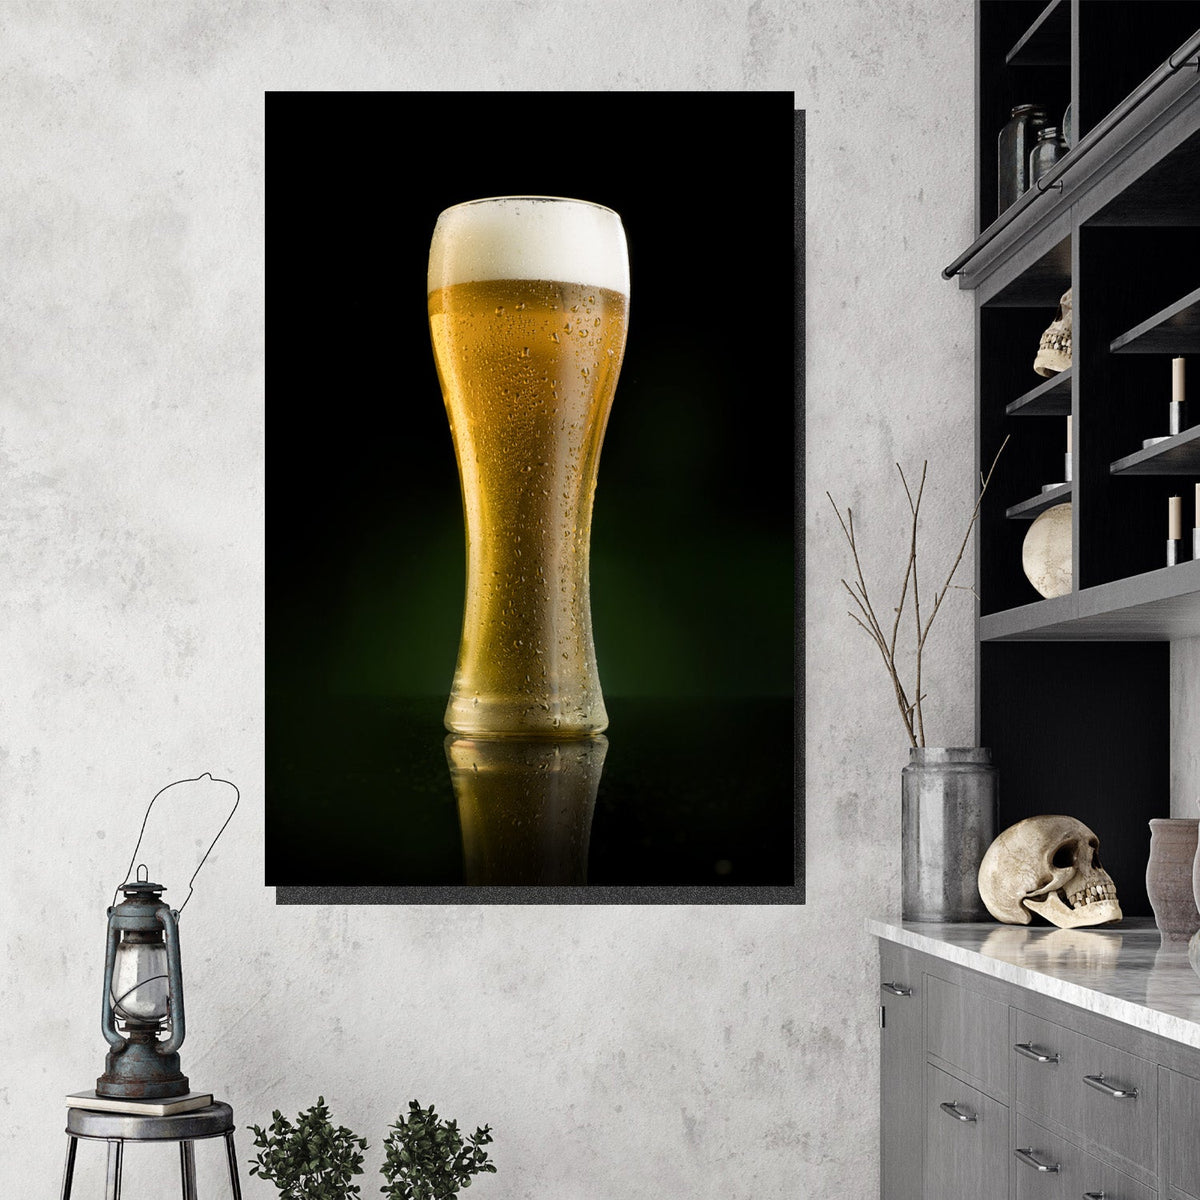 https://cdn.shopify.com/s/files/1/0387/9986/8044/products/FrostedGlassofBeerCanvasArtprintStretched-3.jpg